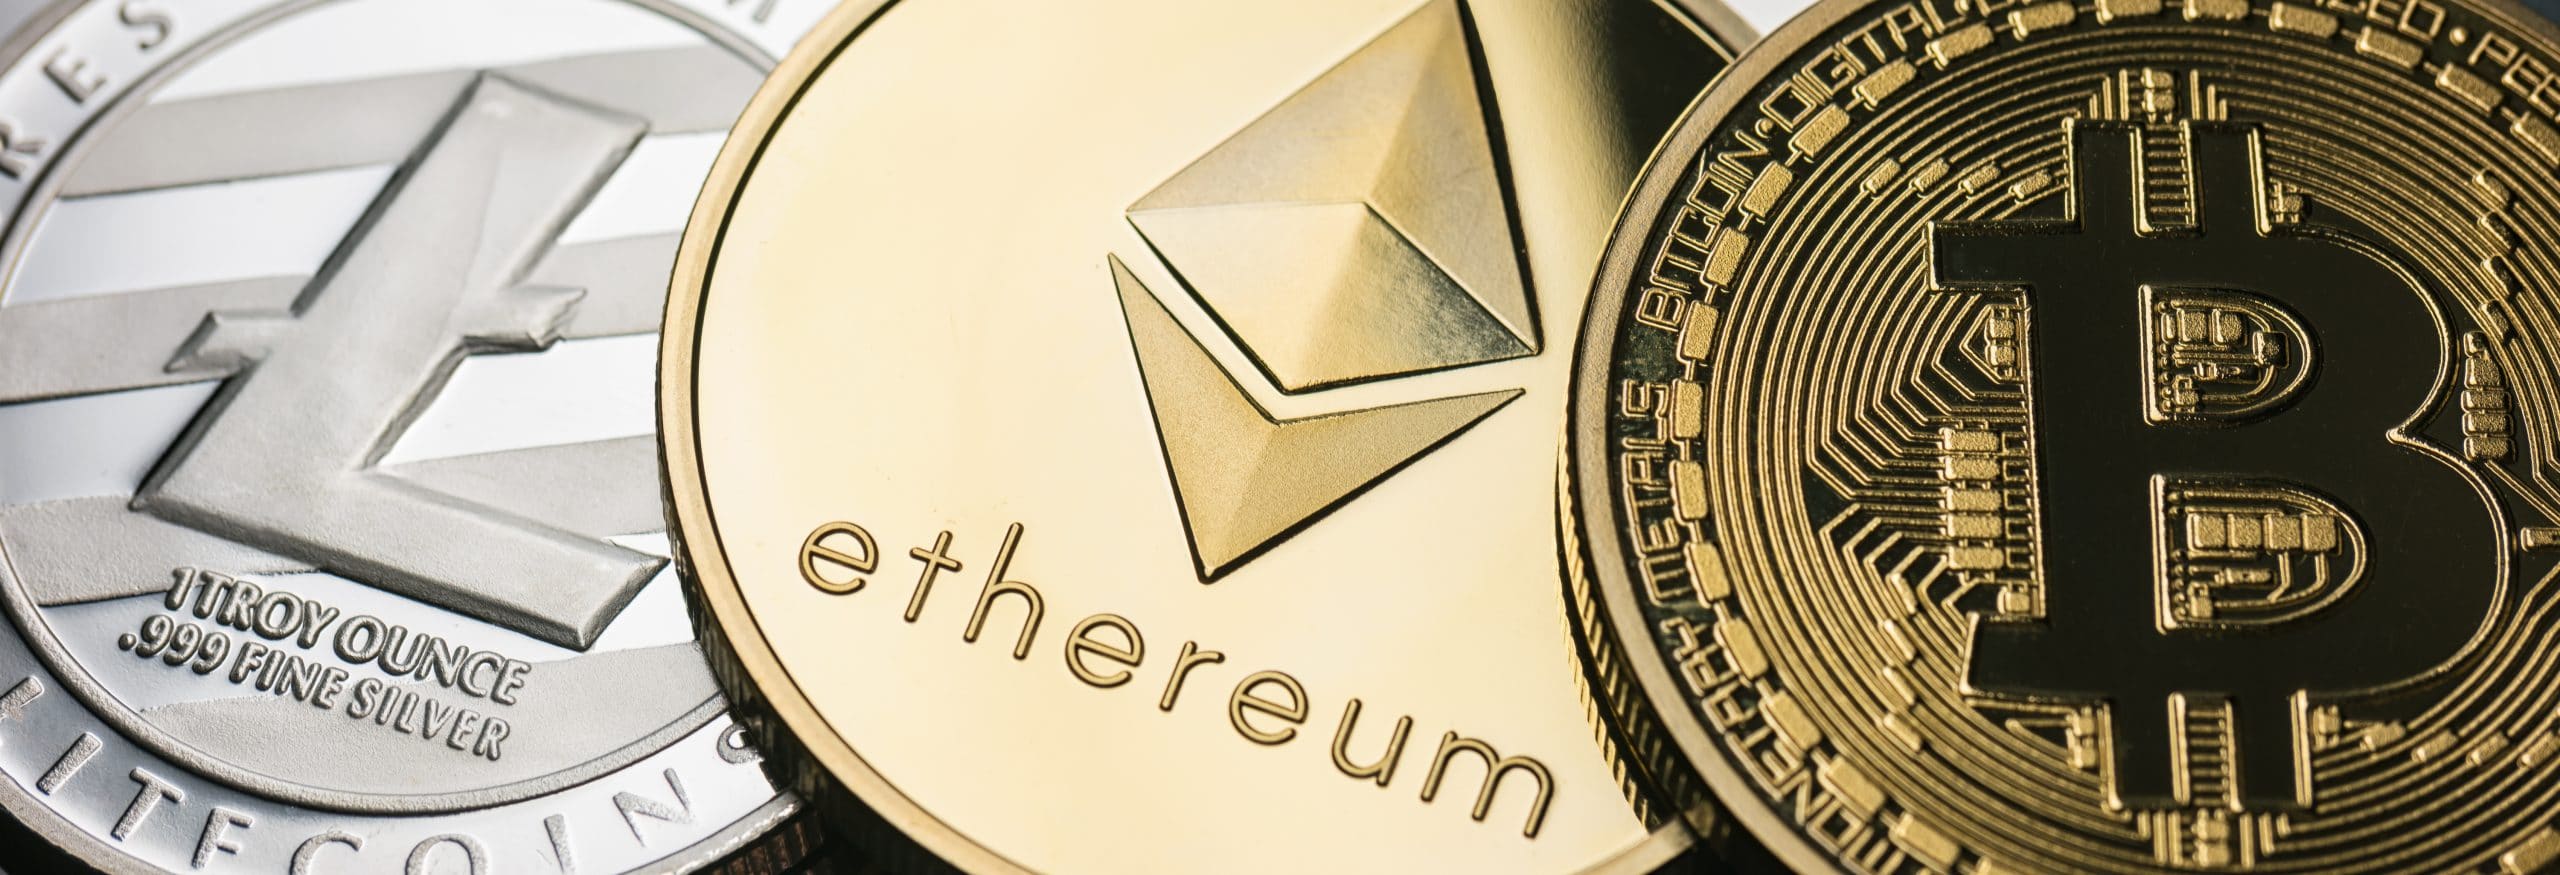 Litecoin, Bitcoin and Ethereum as physical coins